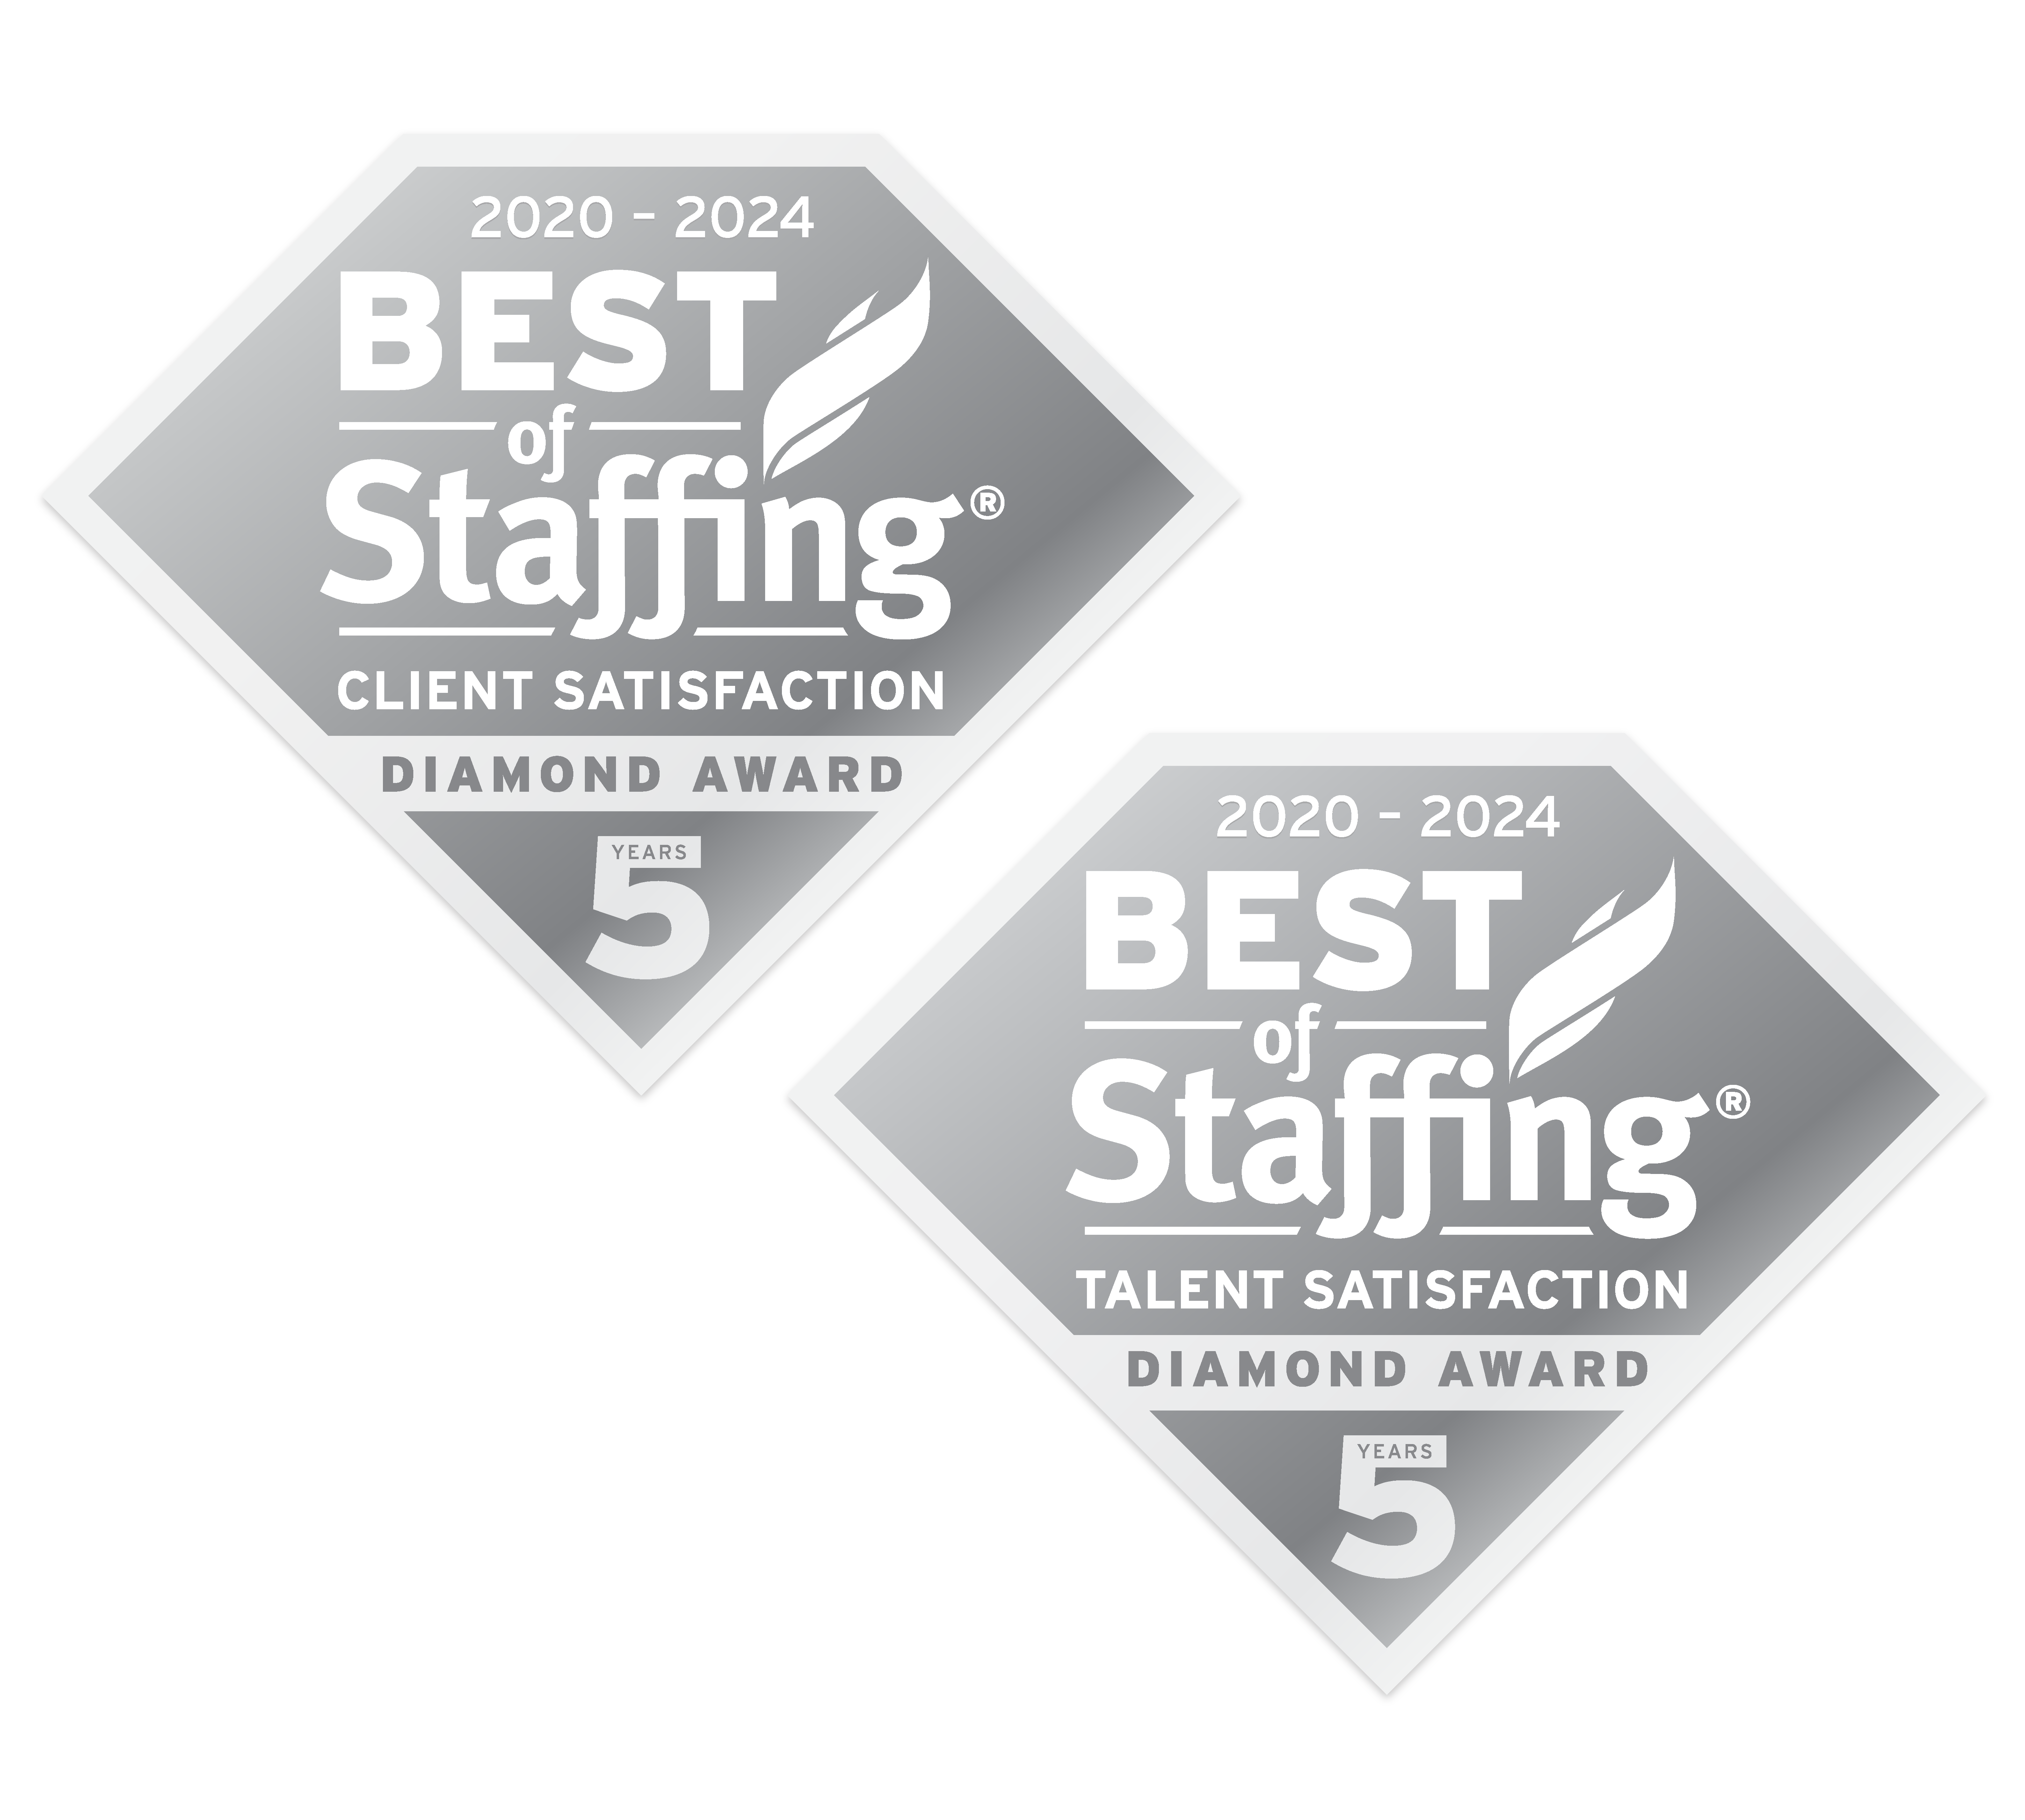 Eliassen Group Wins ClearlyRated’s 2024 Best of Staffing Client and Talent 5 Year Diamond Awards for Service Excellence